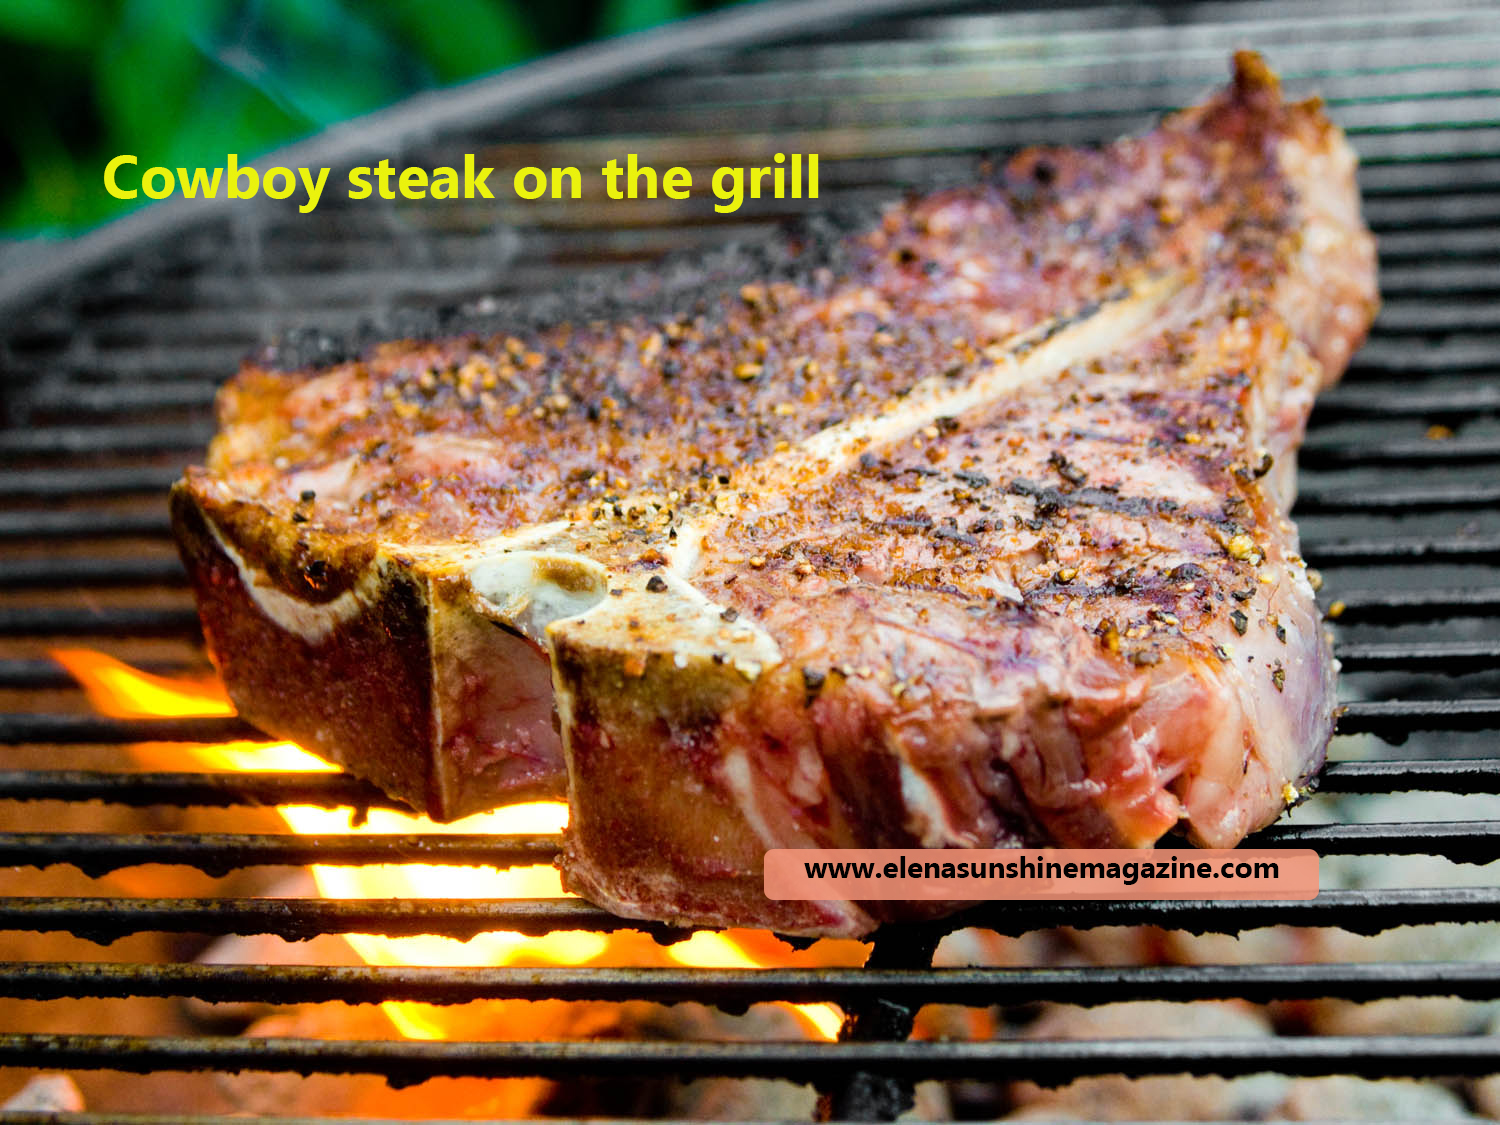 Cowboy steak on the grill